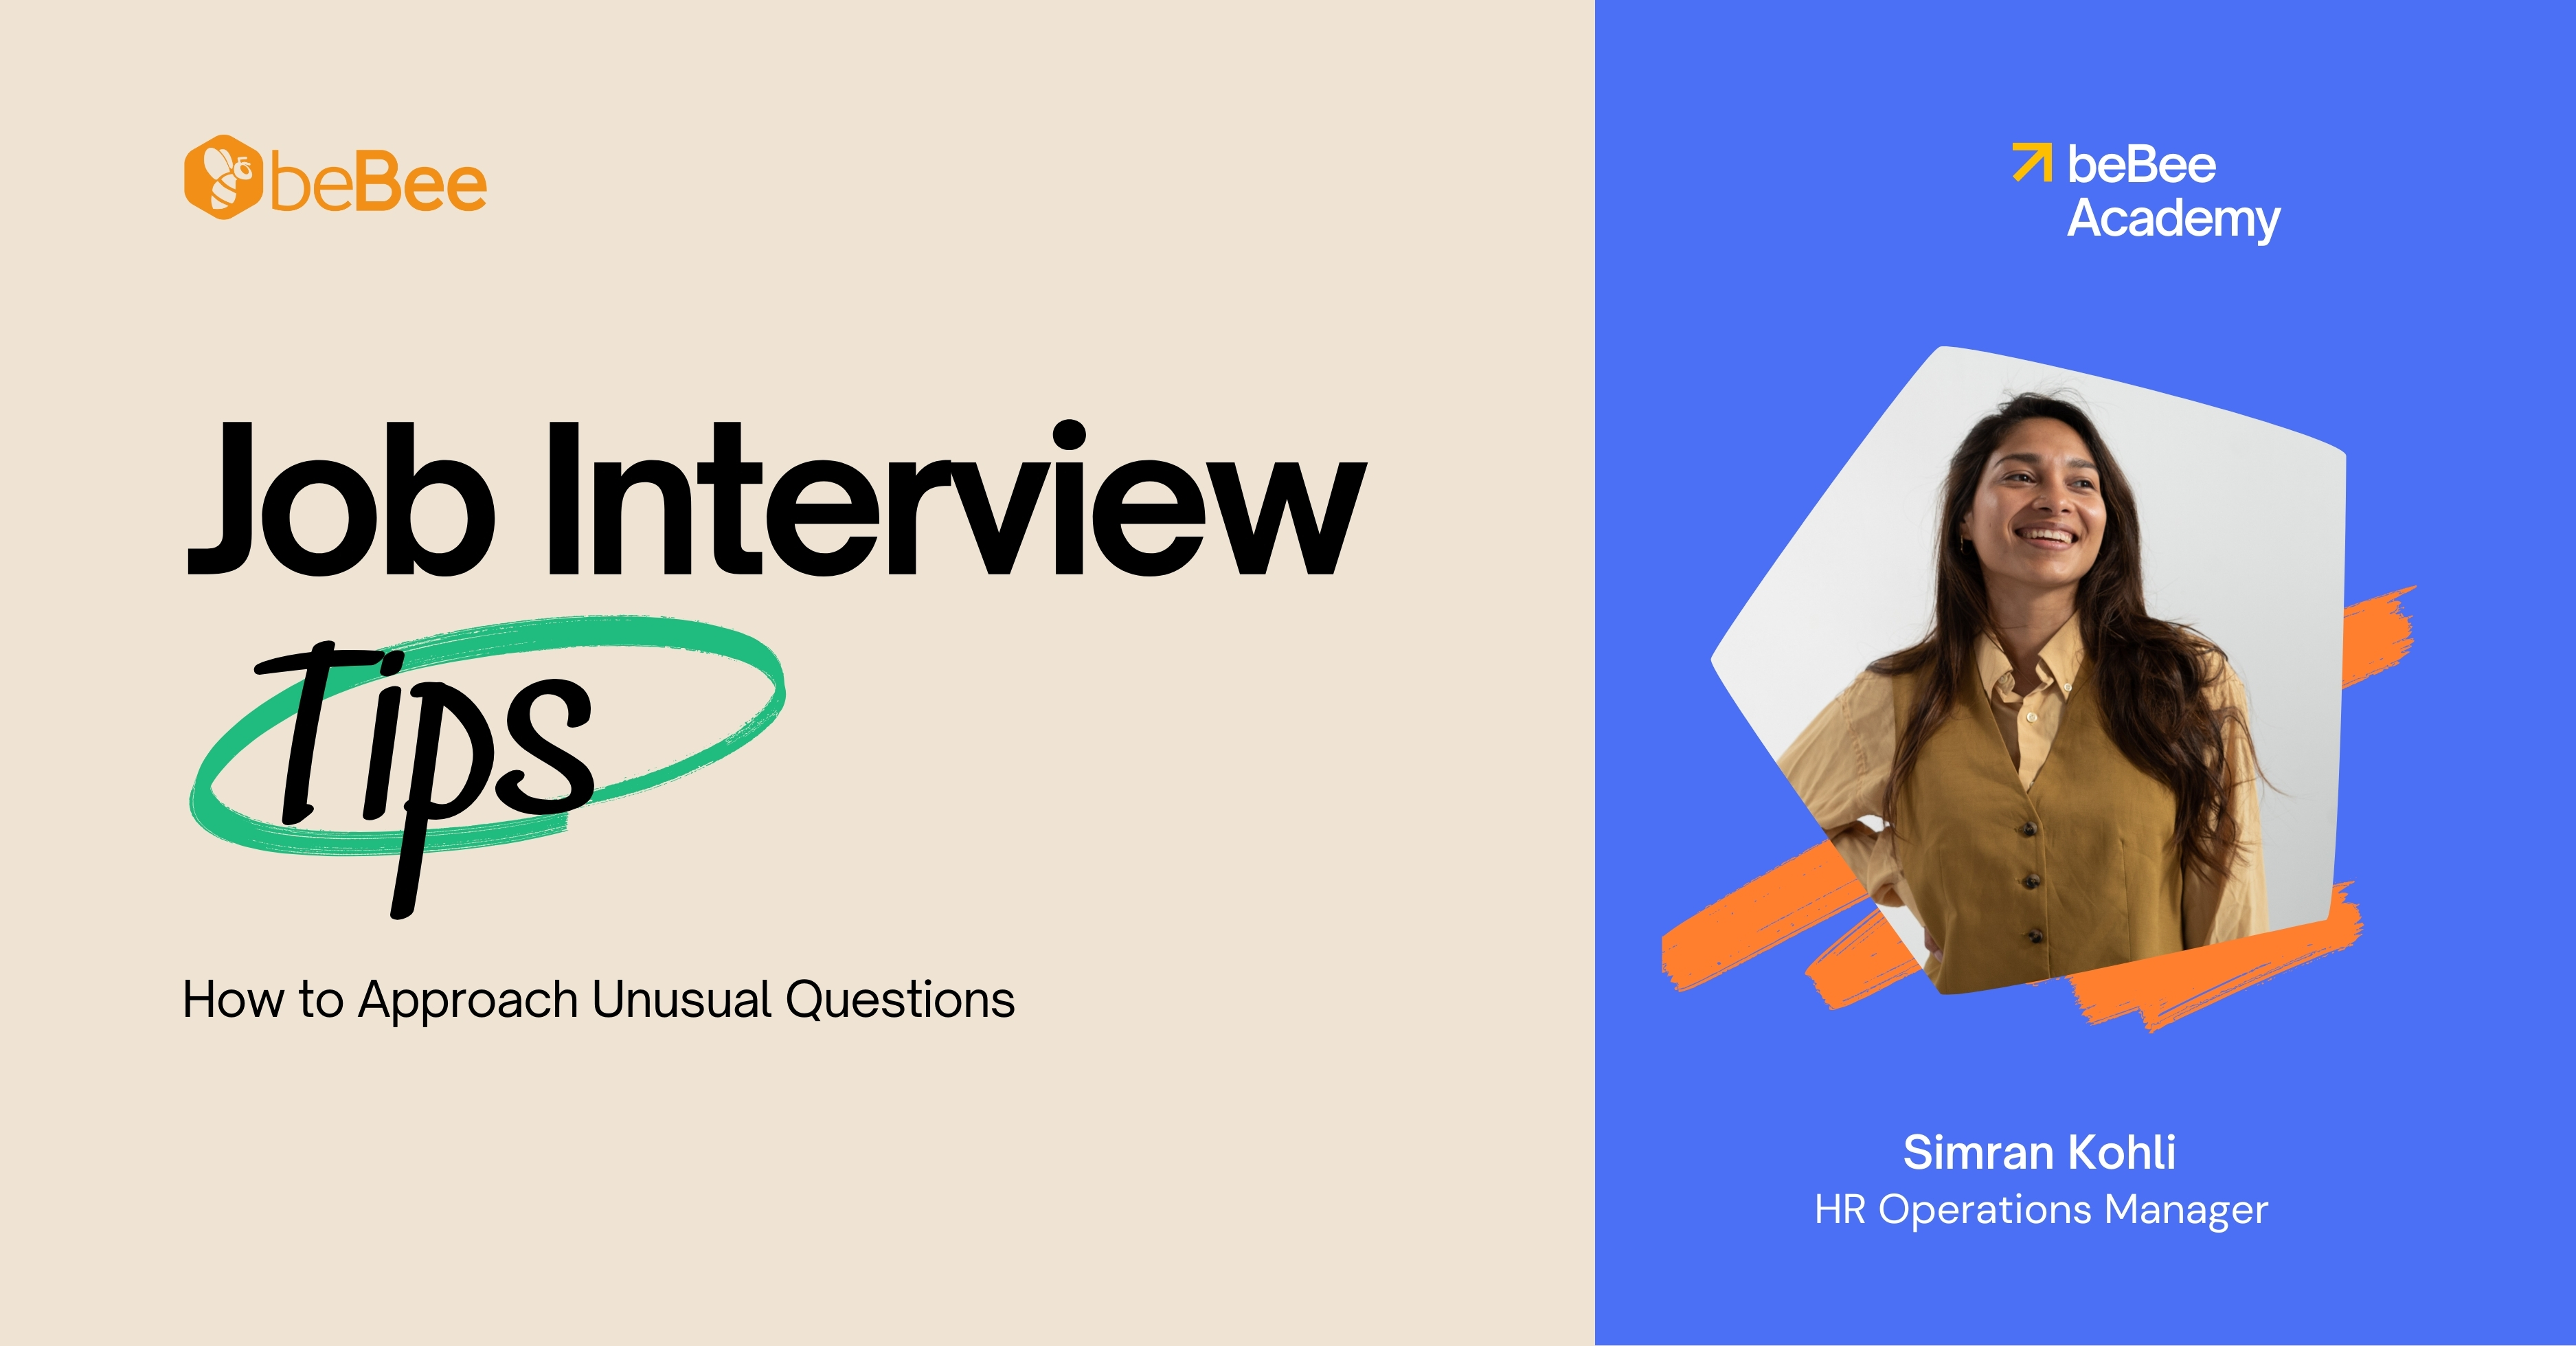 ©beBee 71 beBee

Academy

Job Interview

_—

 

How to Approach Unusual Questions

Simran Kohli
HR Operations Manager